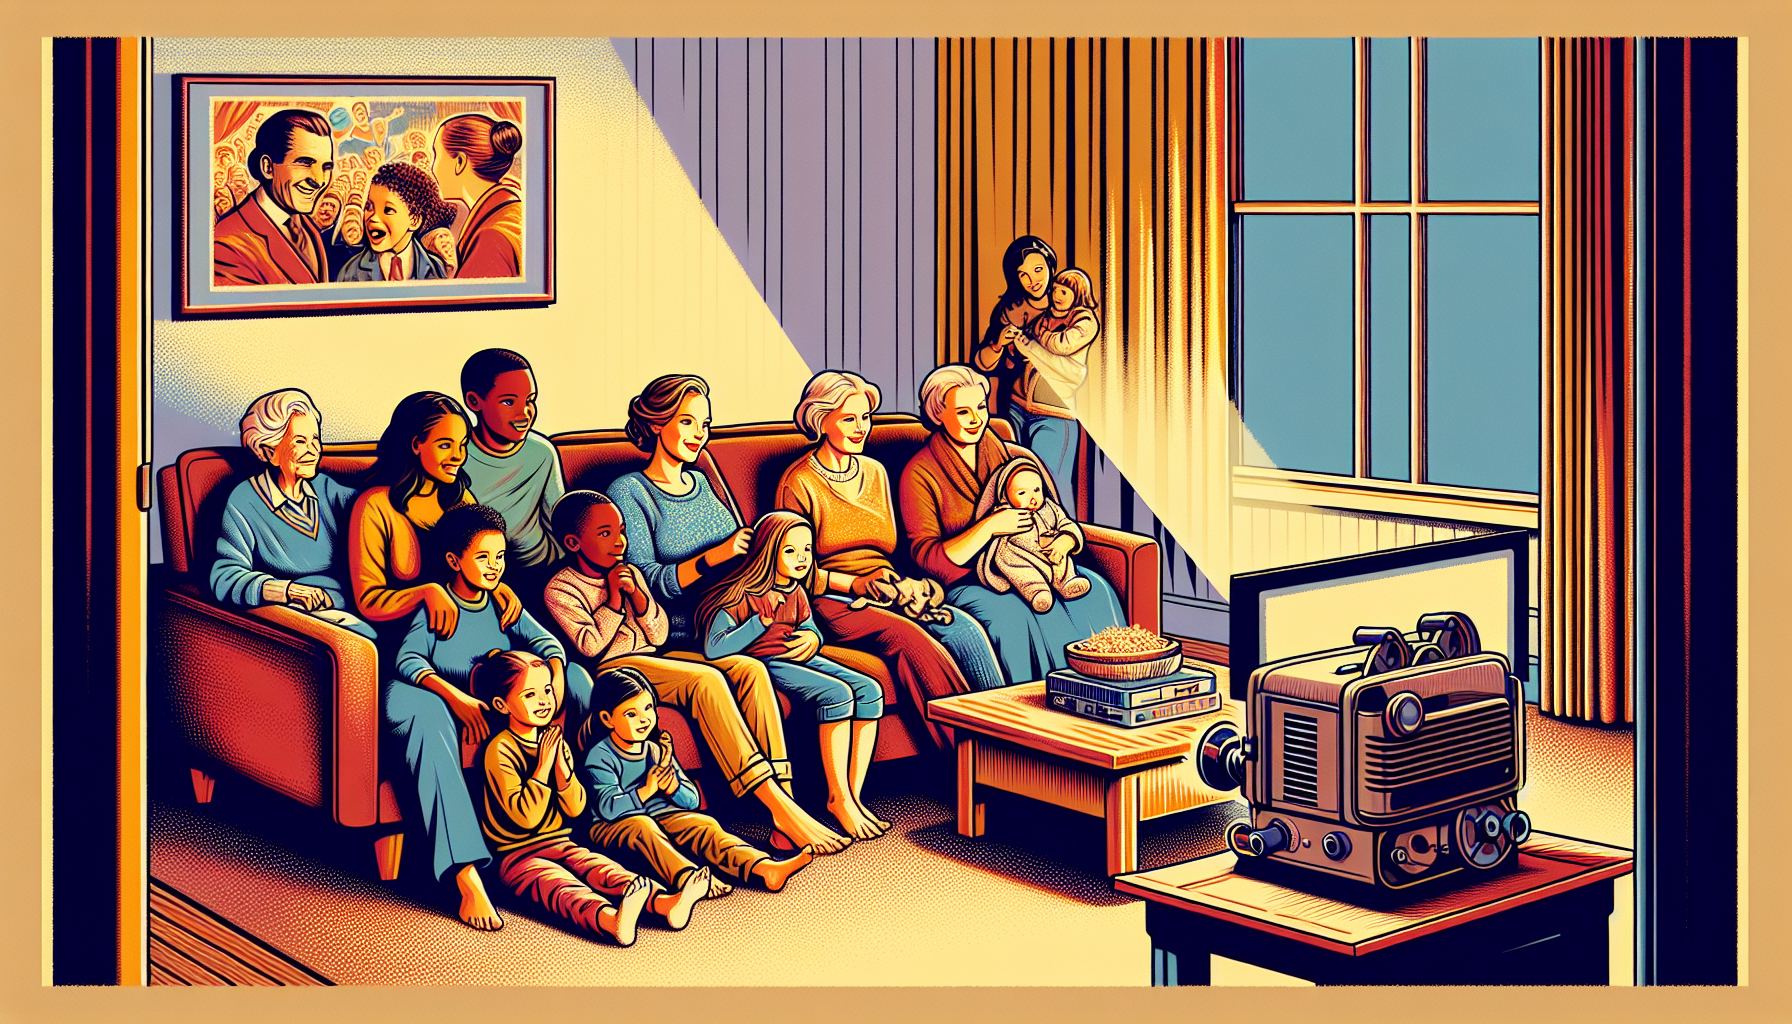 Create a digital painting of a cozy, softly lit living room where a diverse group of mothers and their children are watching scenes of iconic motherhood moments from various films on an old-style proj